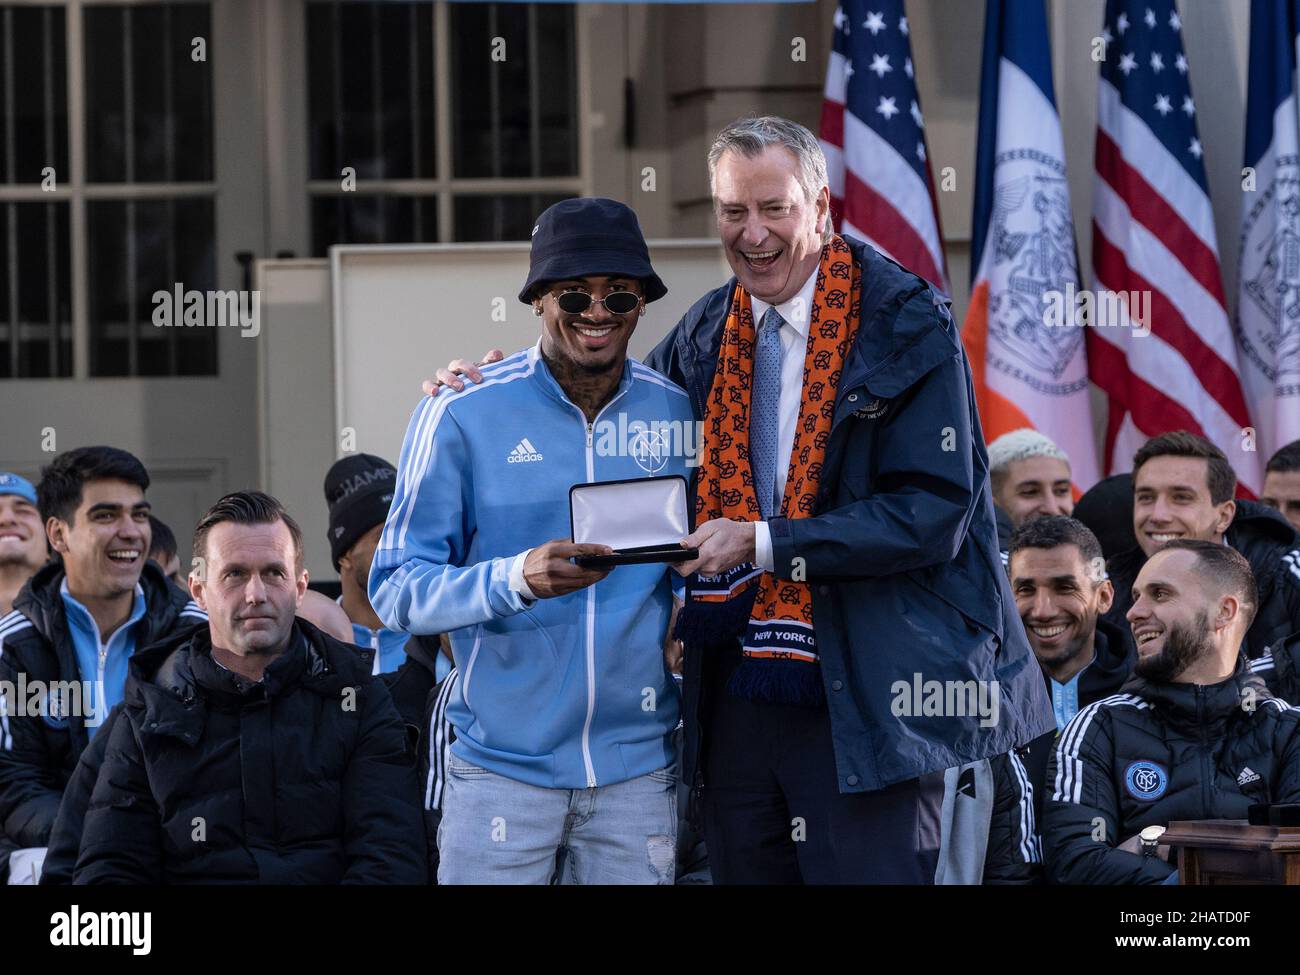 New York, USA. 14th Dec, 2021. Forward Thiago received Keys to the City from mayor Bill de Blasio during celebration for NYCFC winning the 2021 MLS Cup on City Hall steps in New York on December 14, 2021. NYCFC finished the regular season in 4th place and played almost all playoff games away. Winning the MLS Cup is the first trophy won by the franchise since it was established 7 years ago. NYCFC is part of the City Football Group which owns football clubs around the world. (Photo by Lev Radin/Sipa USA) Credit: Sipa USA/Alamy Live News Stock Photo